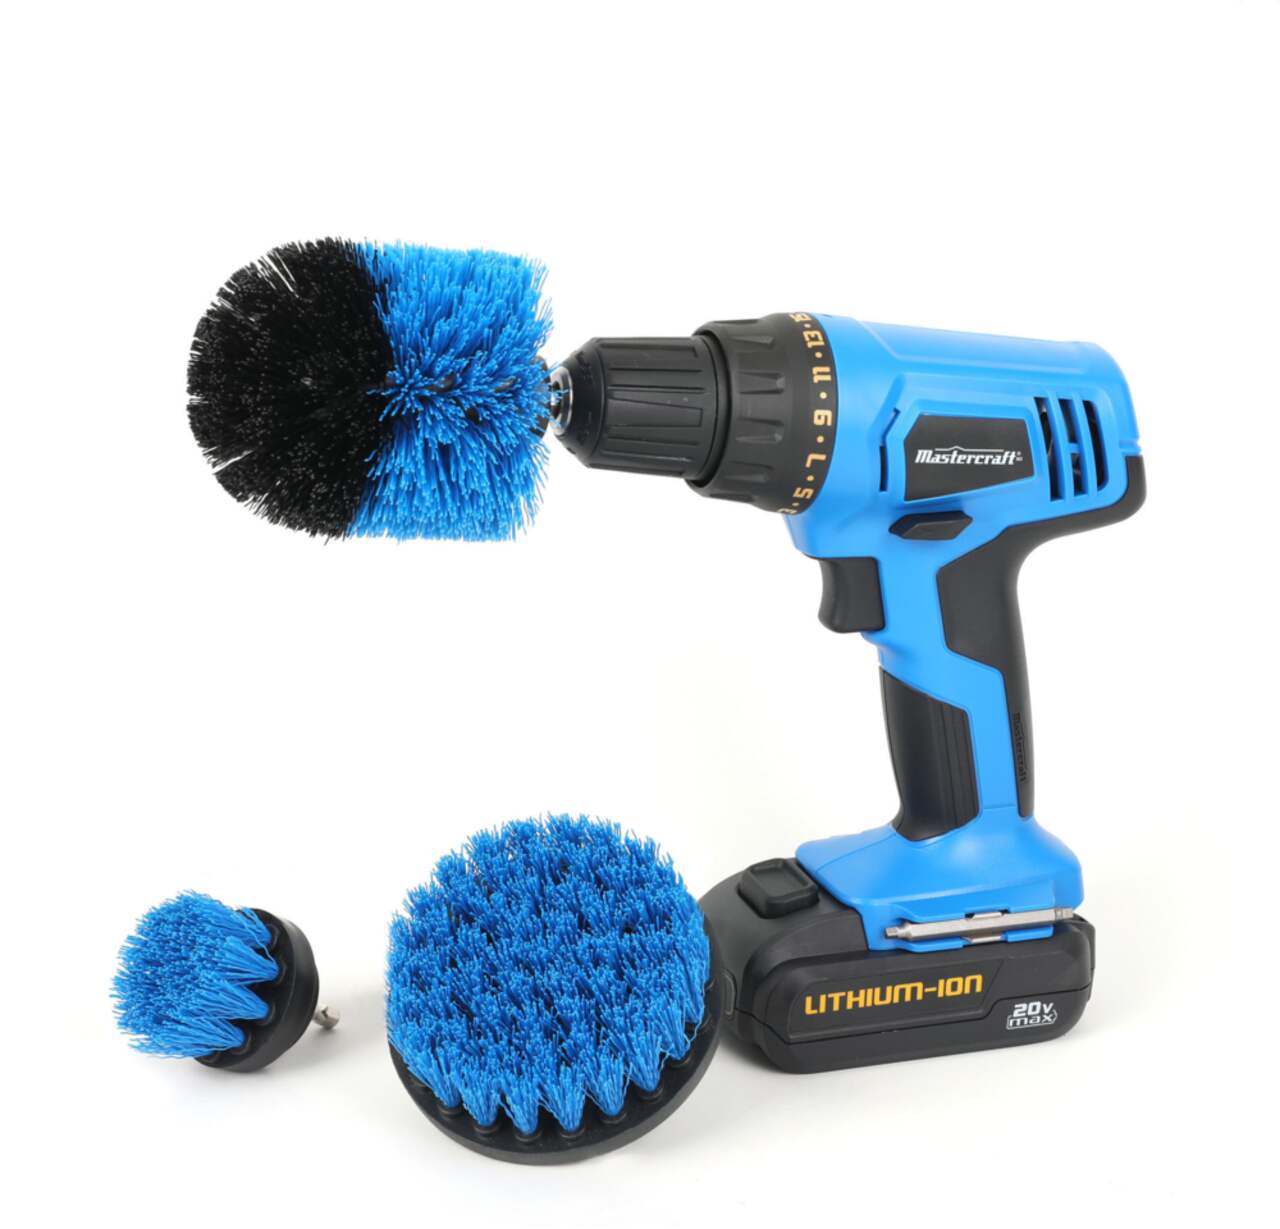 https://media-www.canadiantire.ca/product/fixing/tools/power-tool-accessories/0542096/mastercraft-3-piece-drill-brush-set-bb749140-4621-4fb9-8fd2-9638d1dd6182.png?imdensity=1&imwidth=1244&impolicy=mZoom